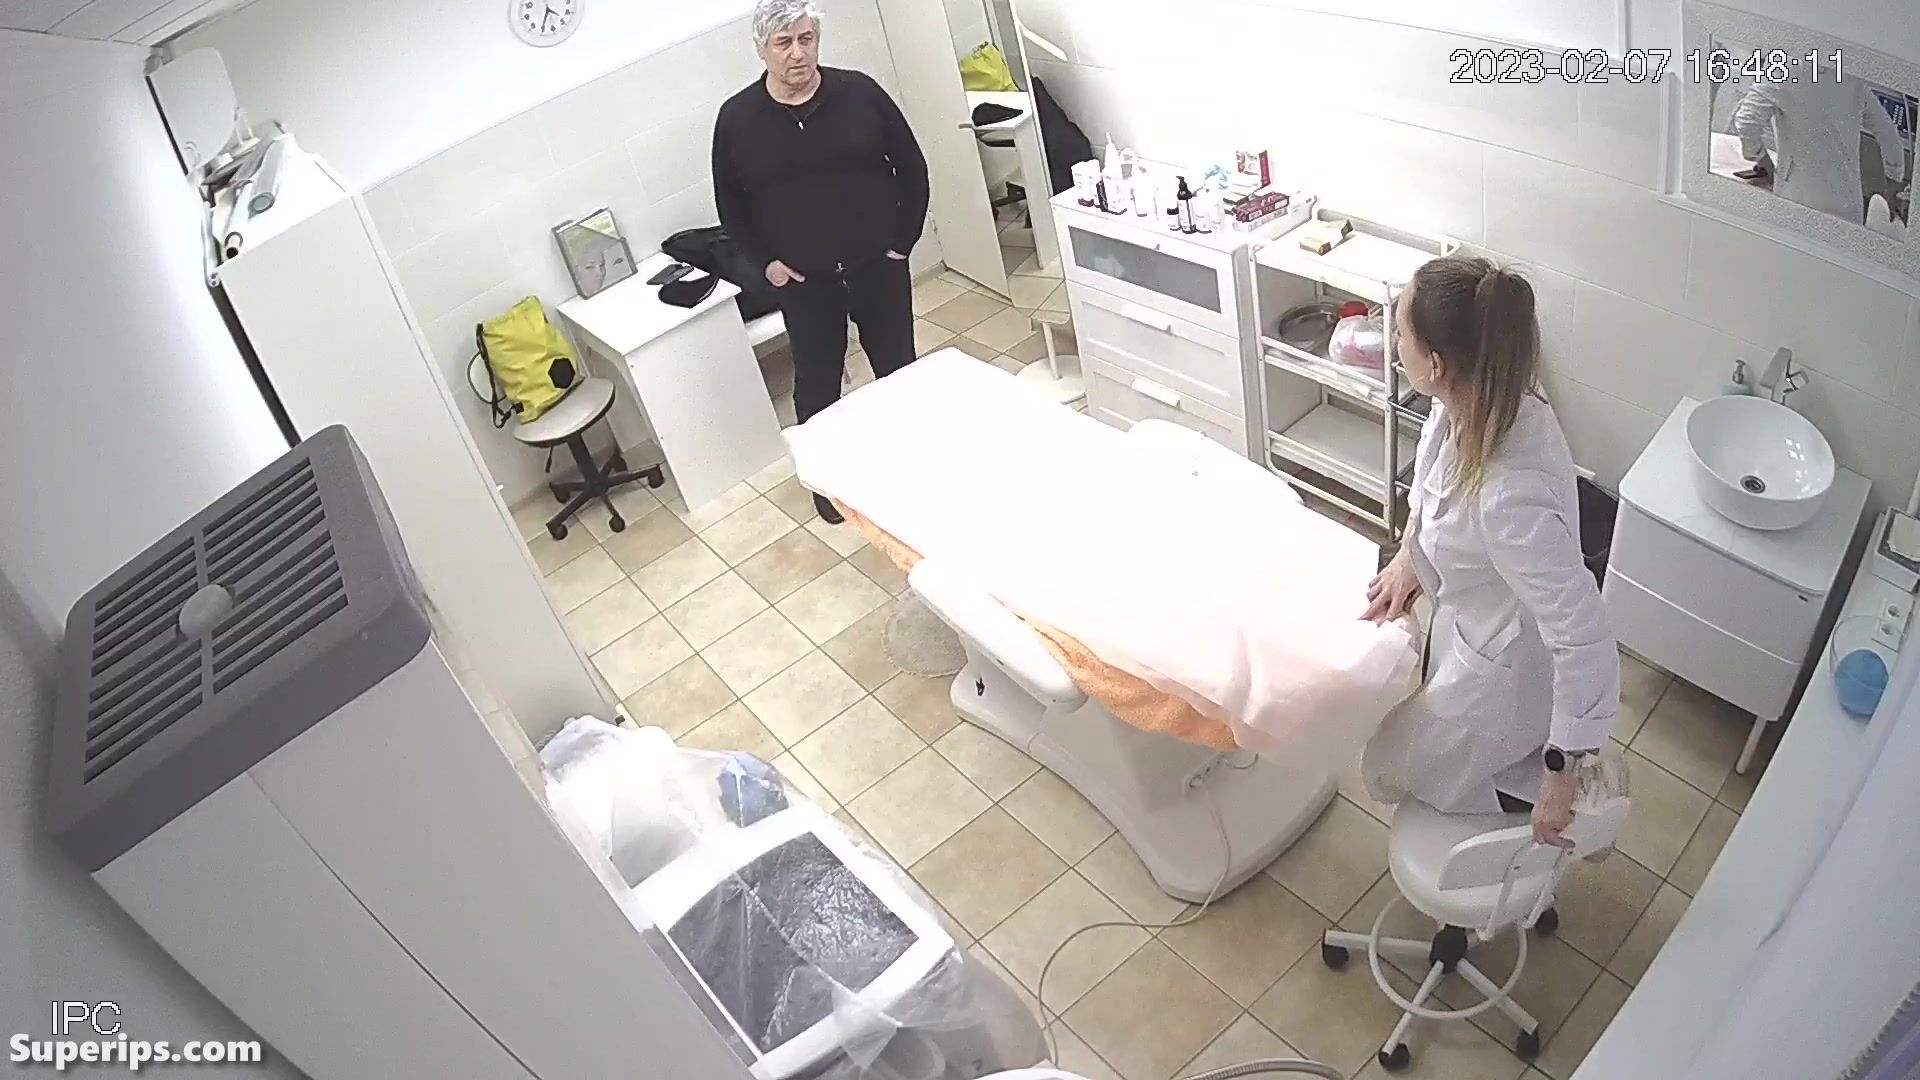 German woman doctor gives a handjob to her patient